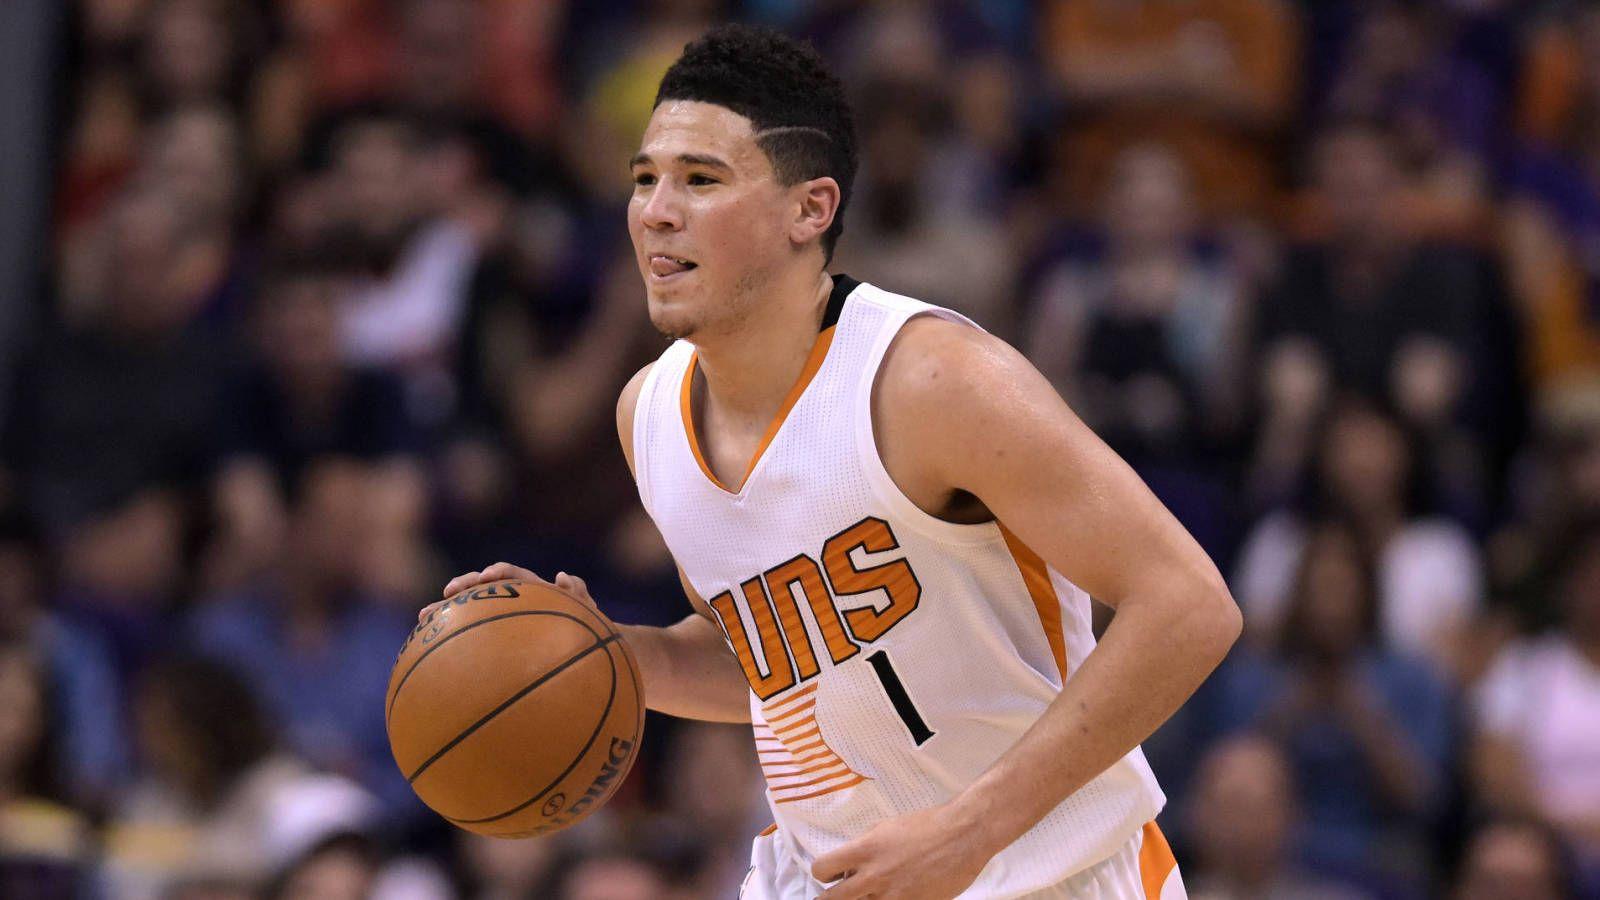 NBA Players React To Devin Booker's 70 Point Game